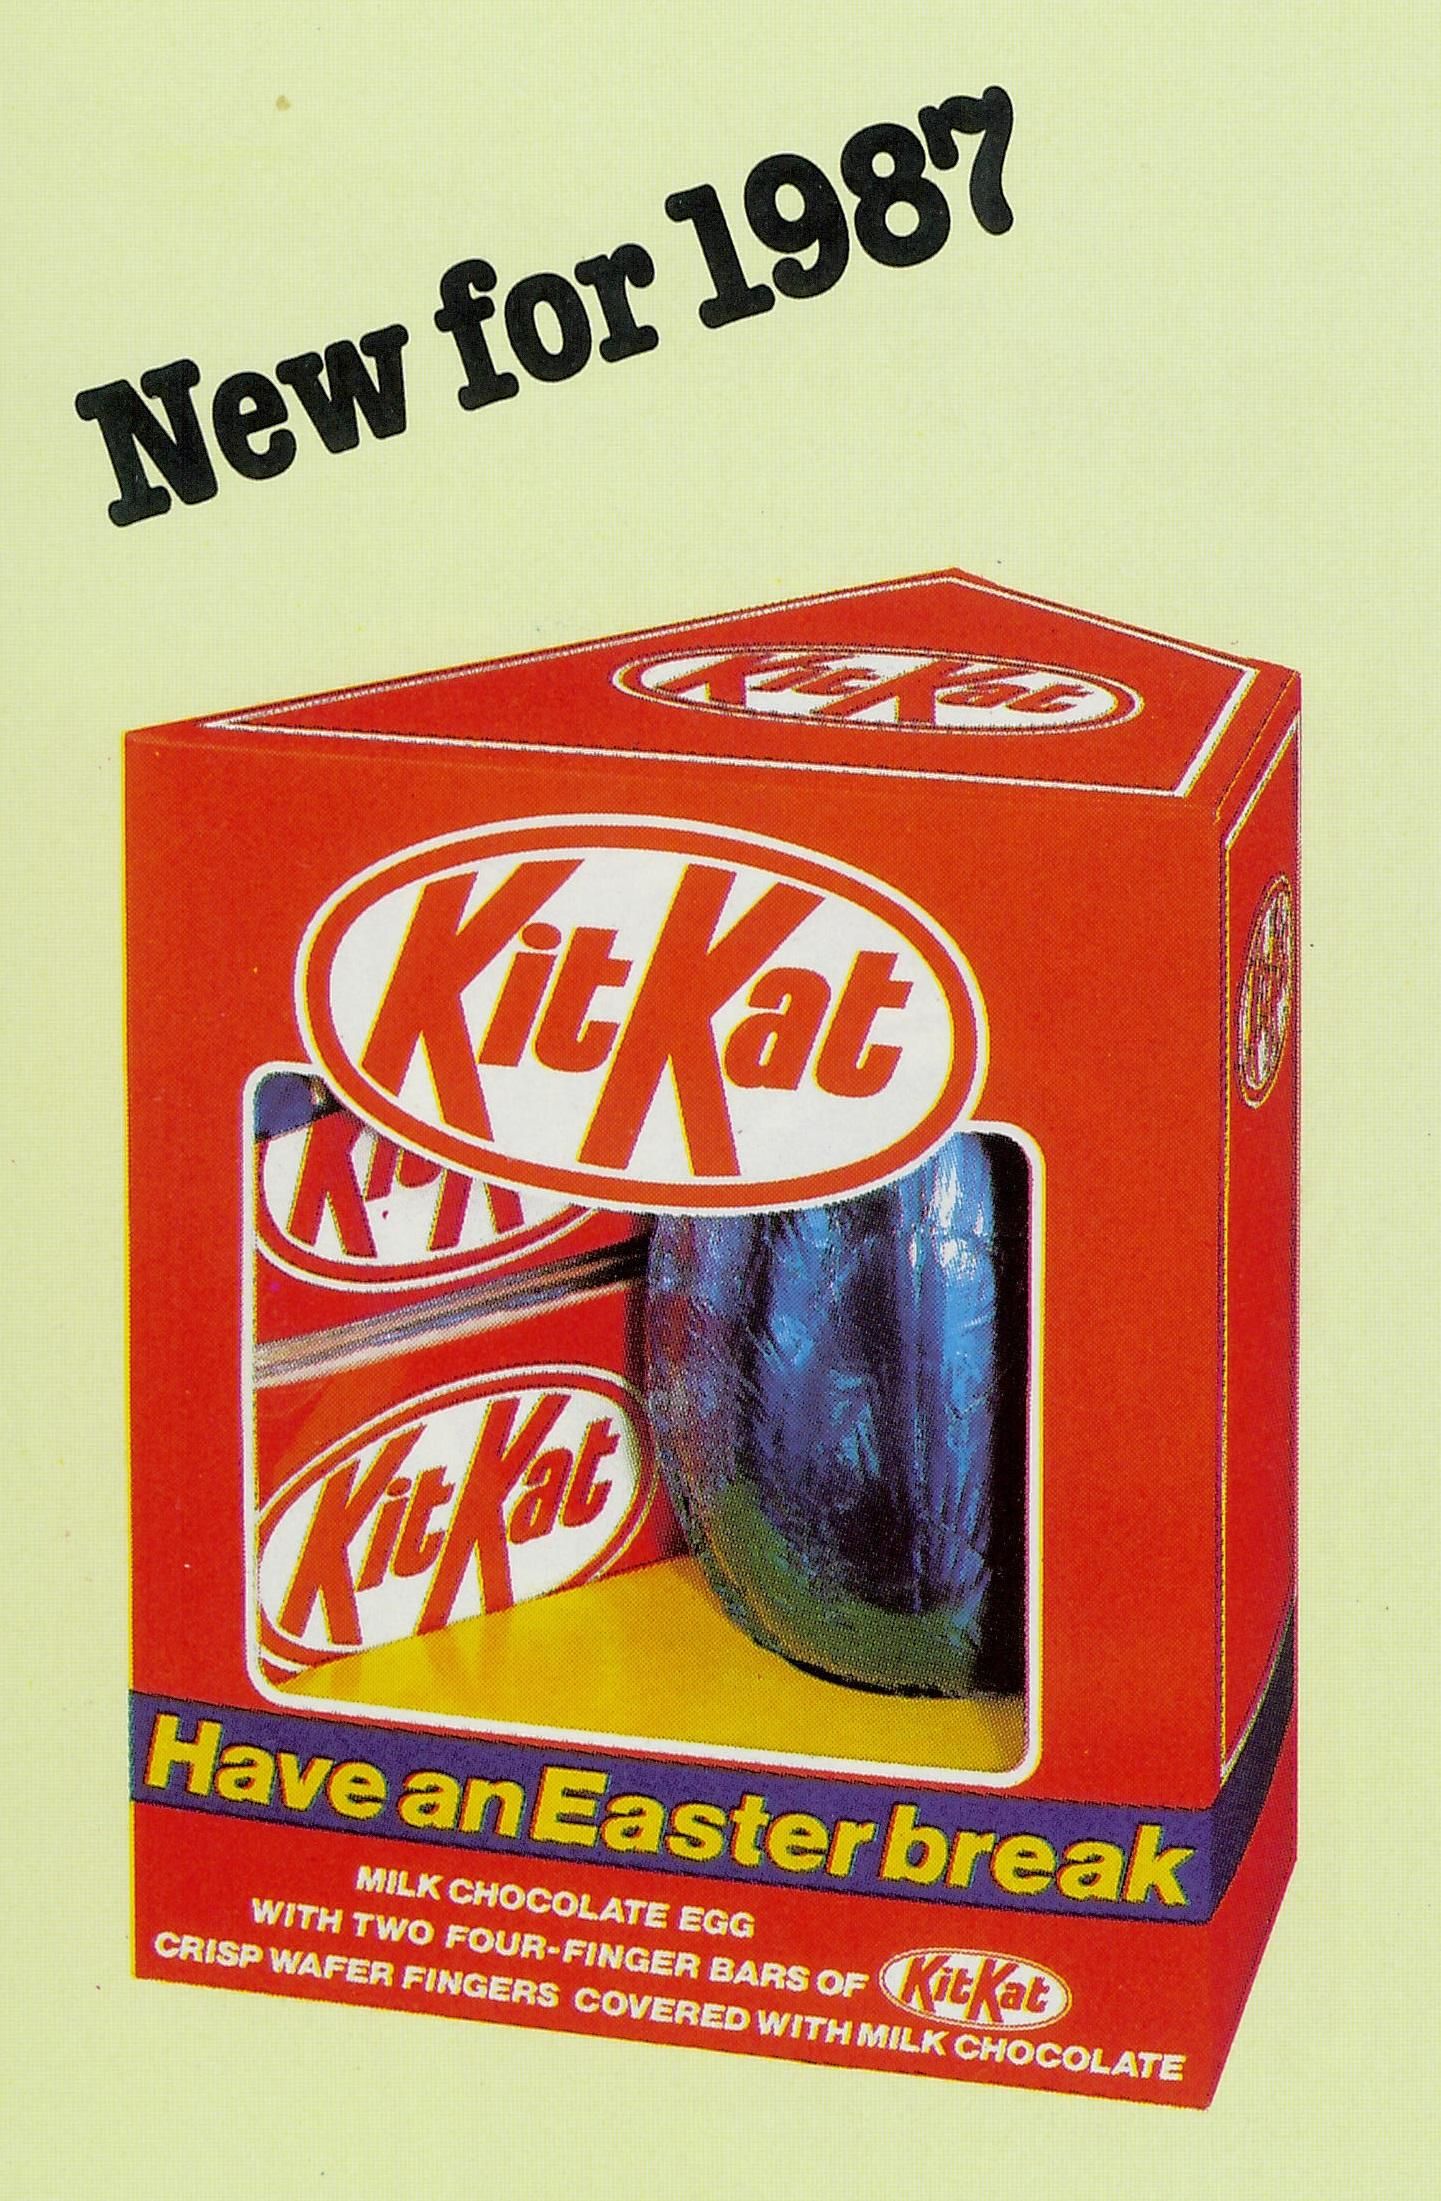 retro easter eggs - New for 1987 Kitkat Have an Easter break Milk Chocolate Egg With Two FourFinger Bars Of Kitkat Crisp Wafer Fingers Covered With Milk Chocolate